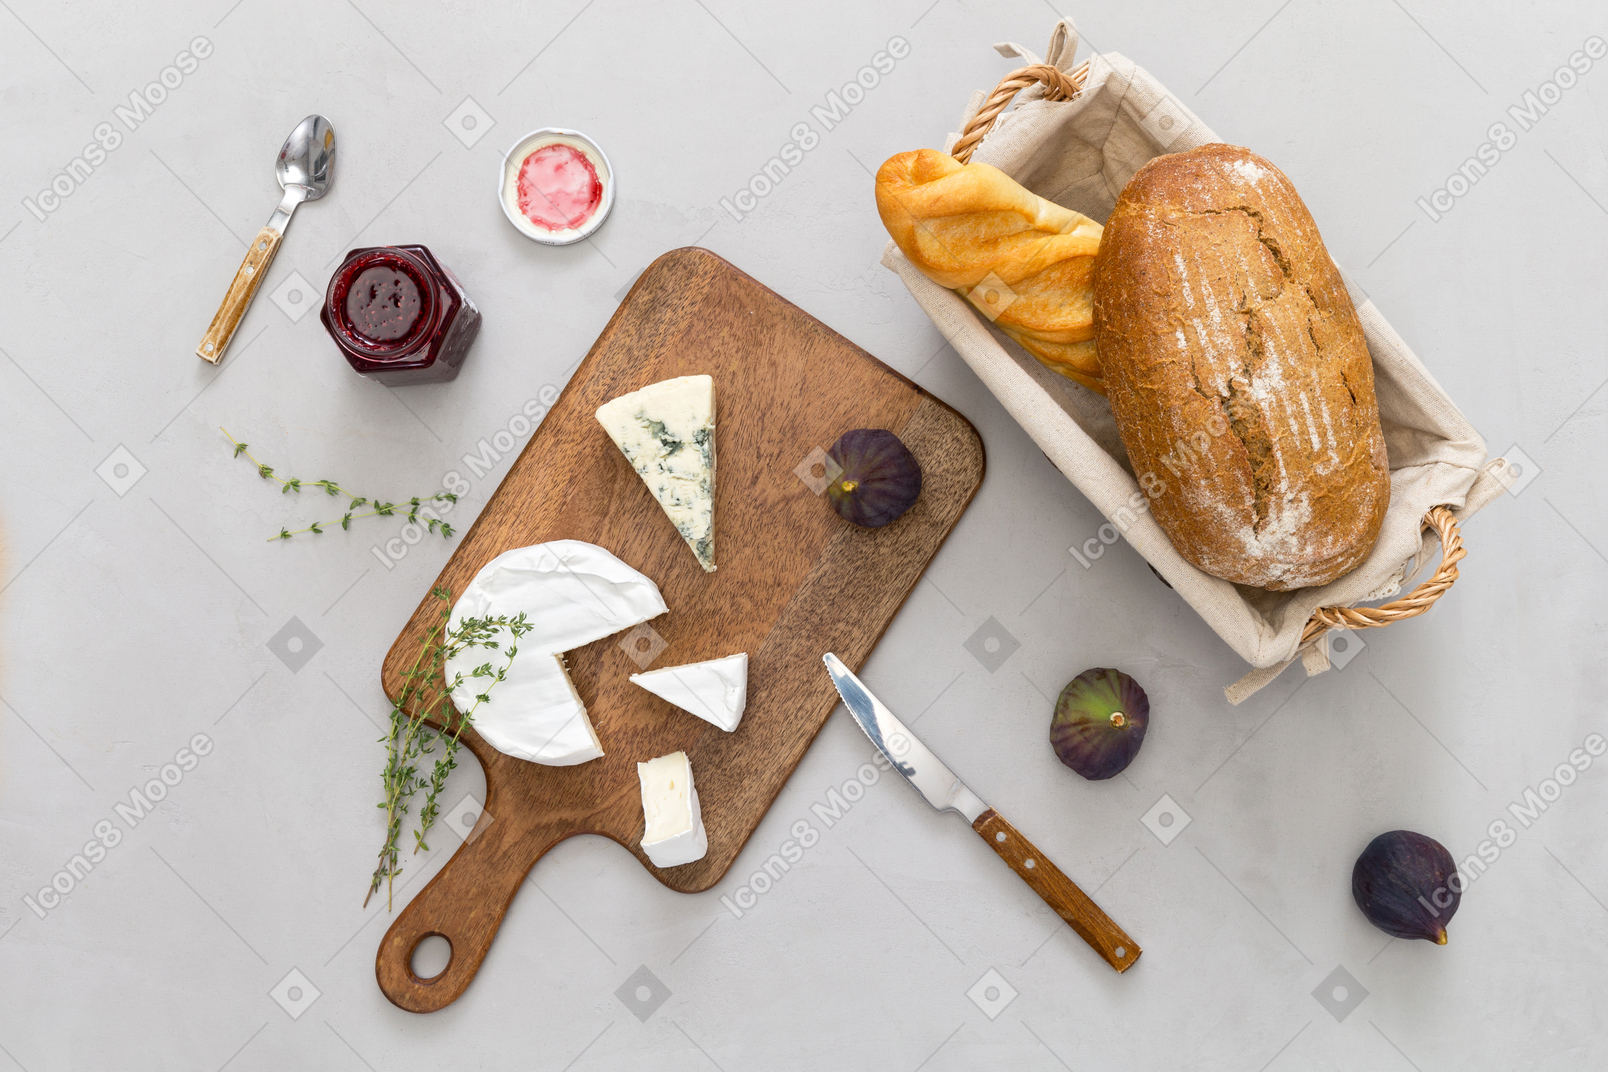 Cutting board with some baguette and cheese, some pears and jam